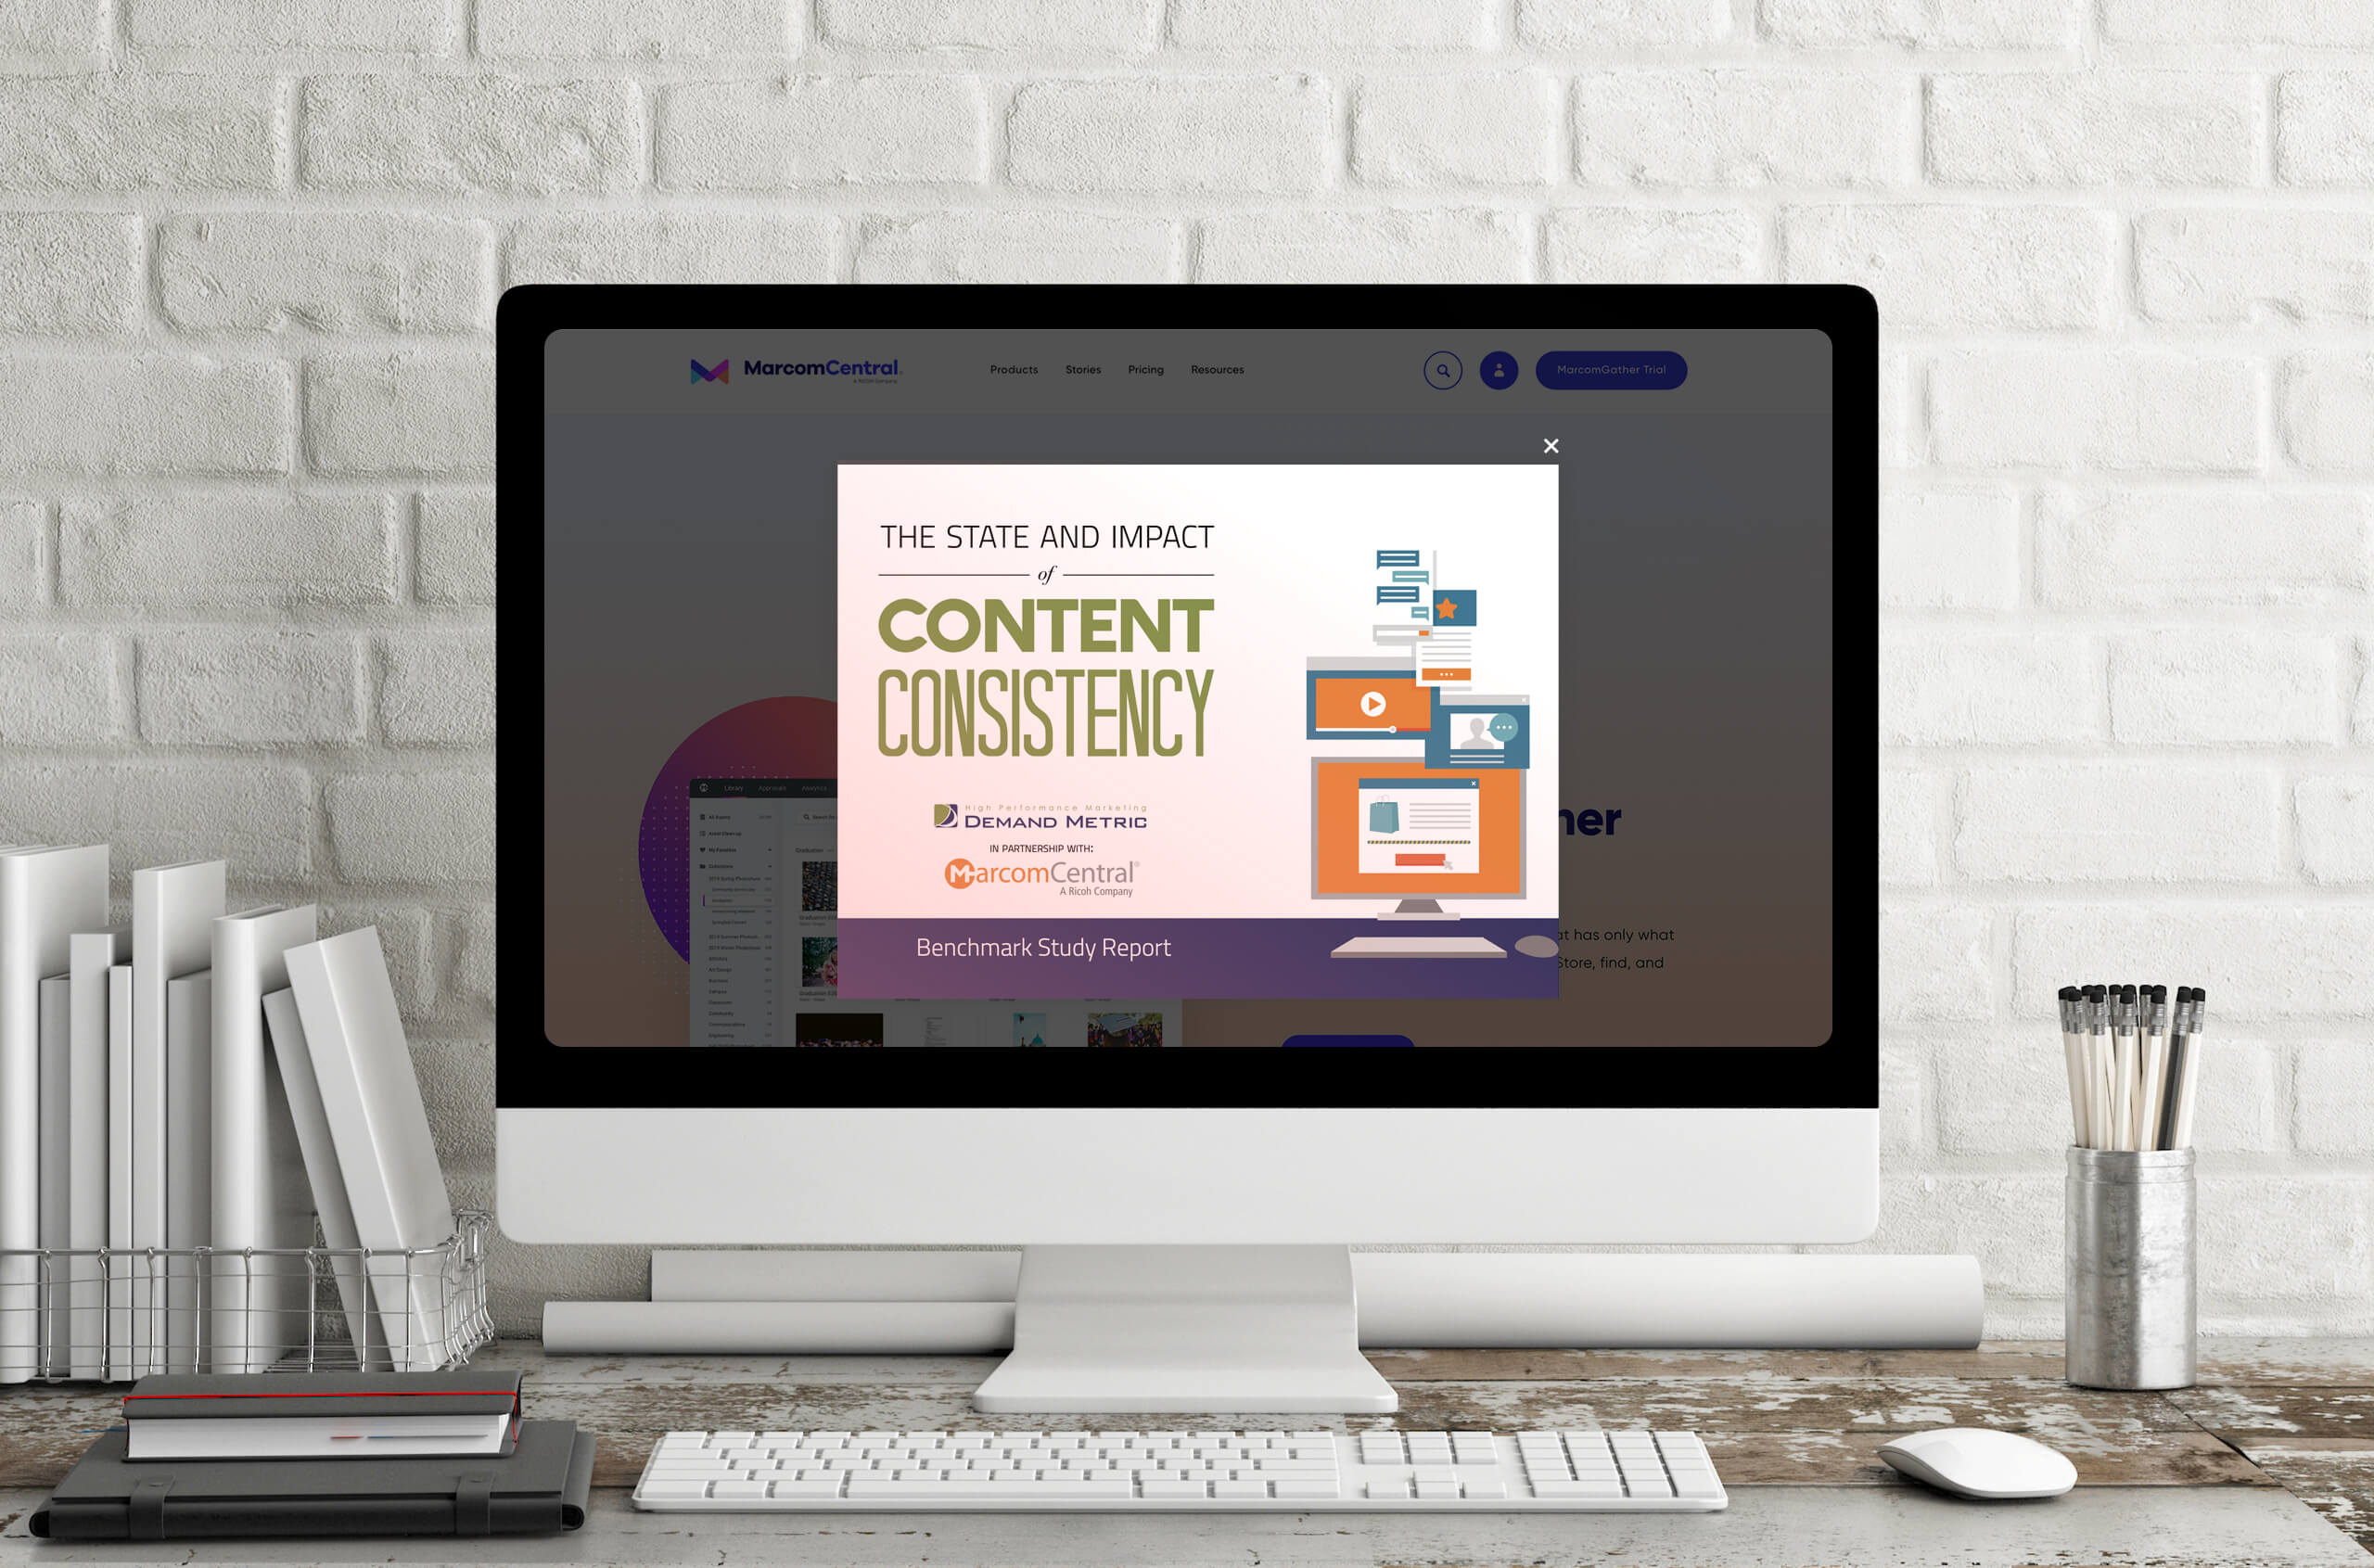 Demand Metric: The State and Impact of Content Consistency